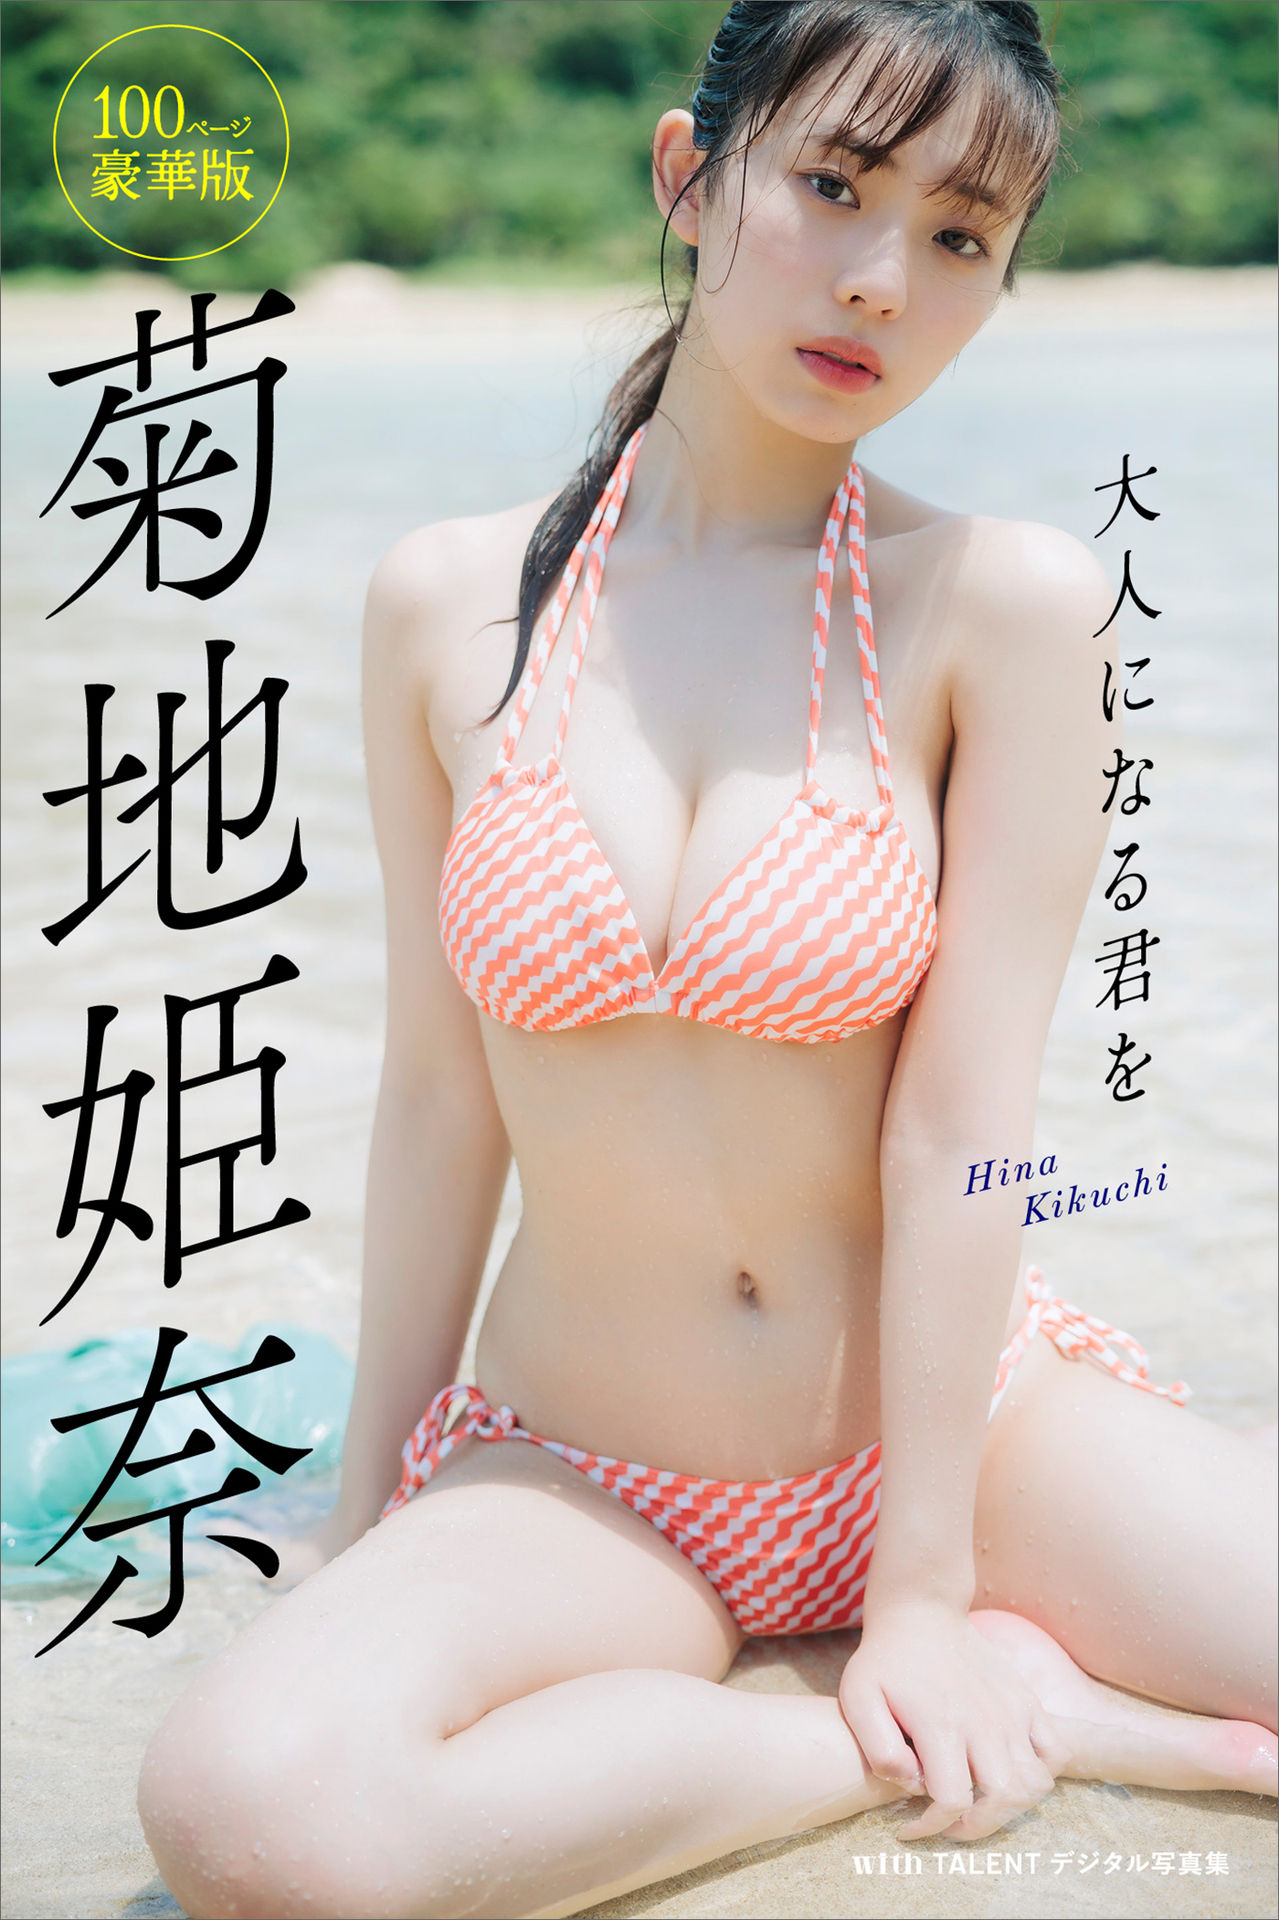 Hina Kikuchi “You’ll become an adult” 100 Page Deluxe Edition with TALENT Digital Photo Book